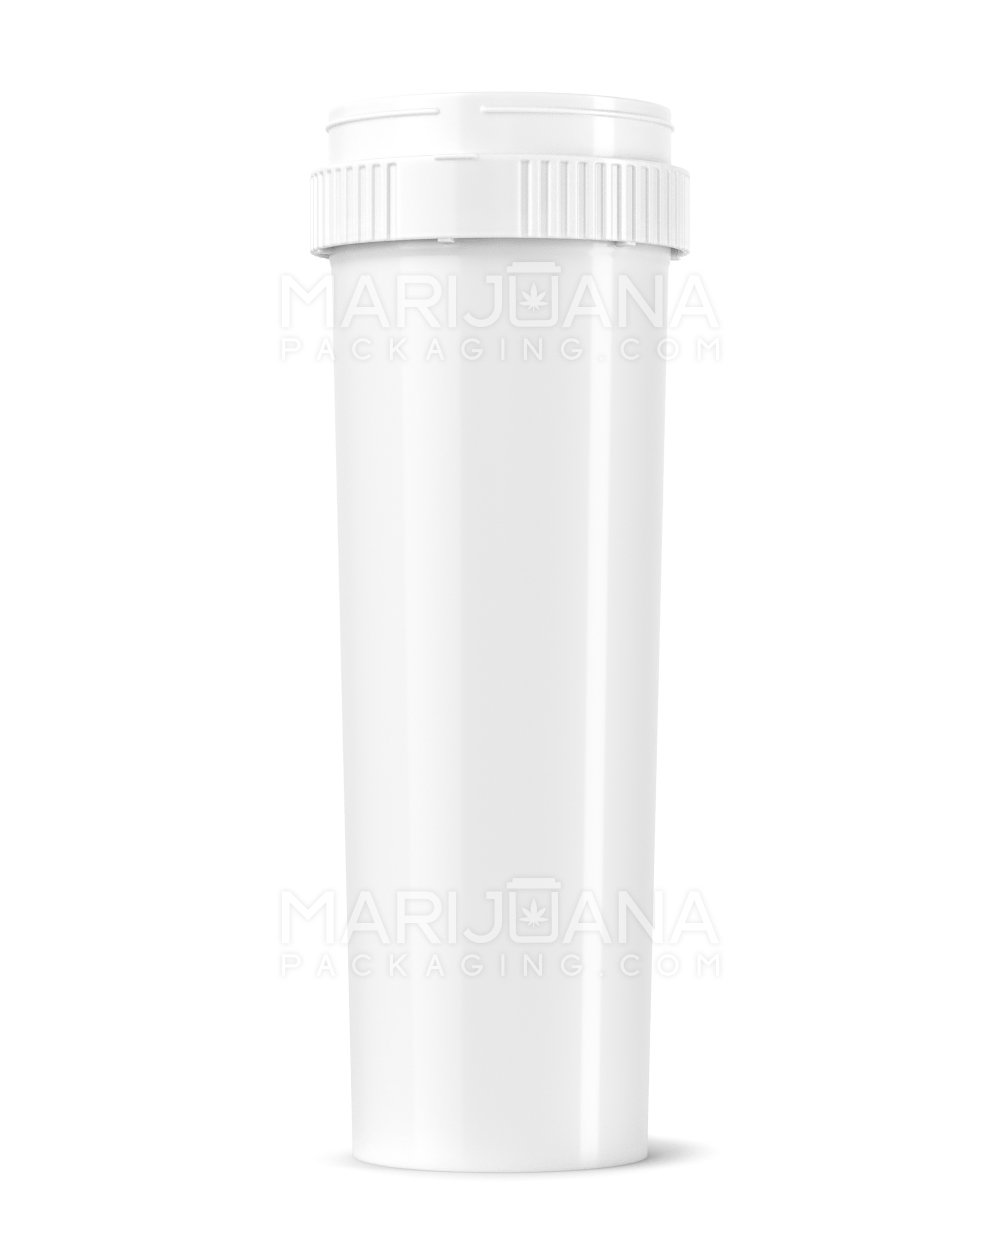 Child Resistant | Push & Turn Vial with Grinder Cap | 60dr - White Plastic - 100 Count - 4